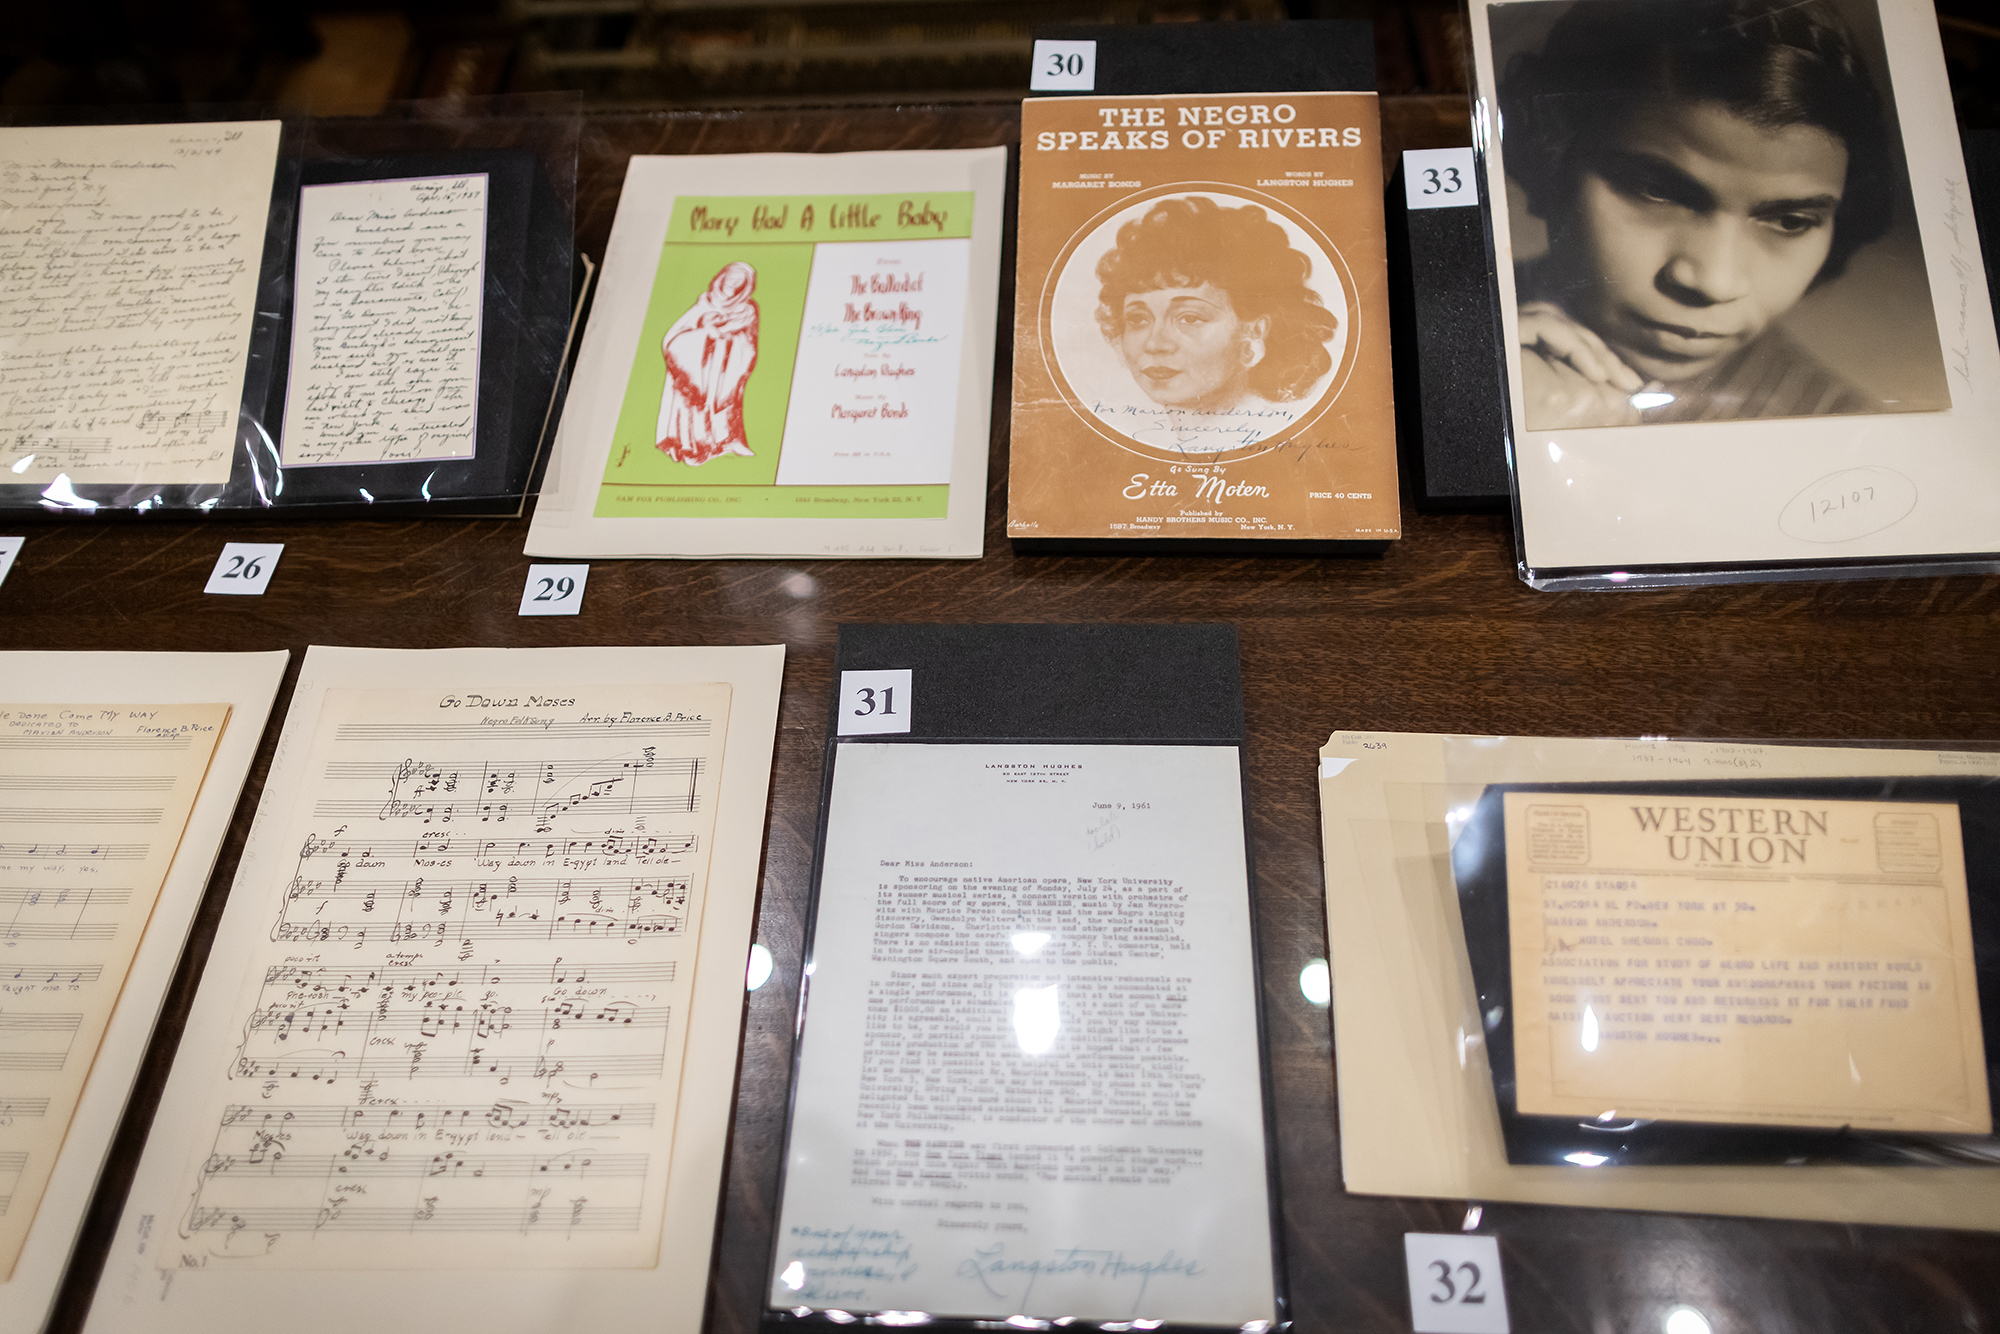 Marian Anderson Collection at the Kislak Center.